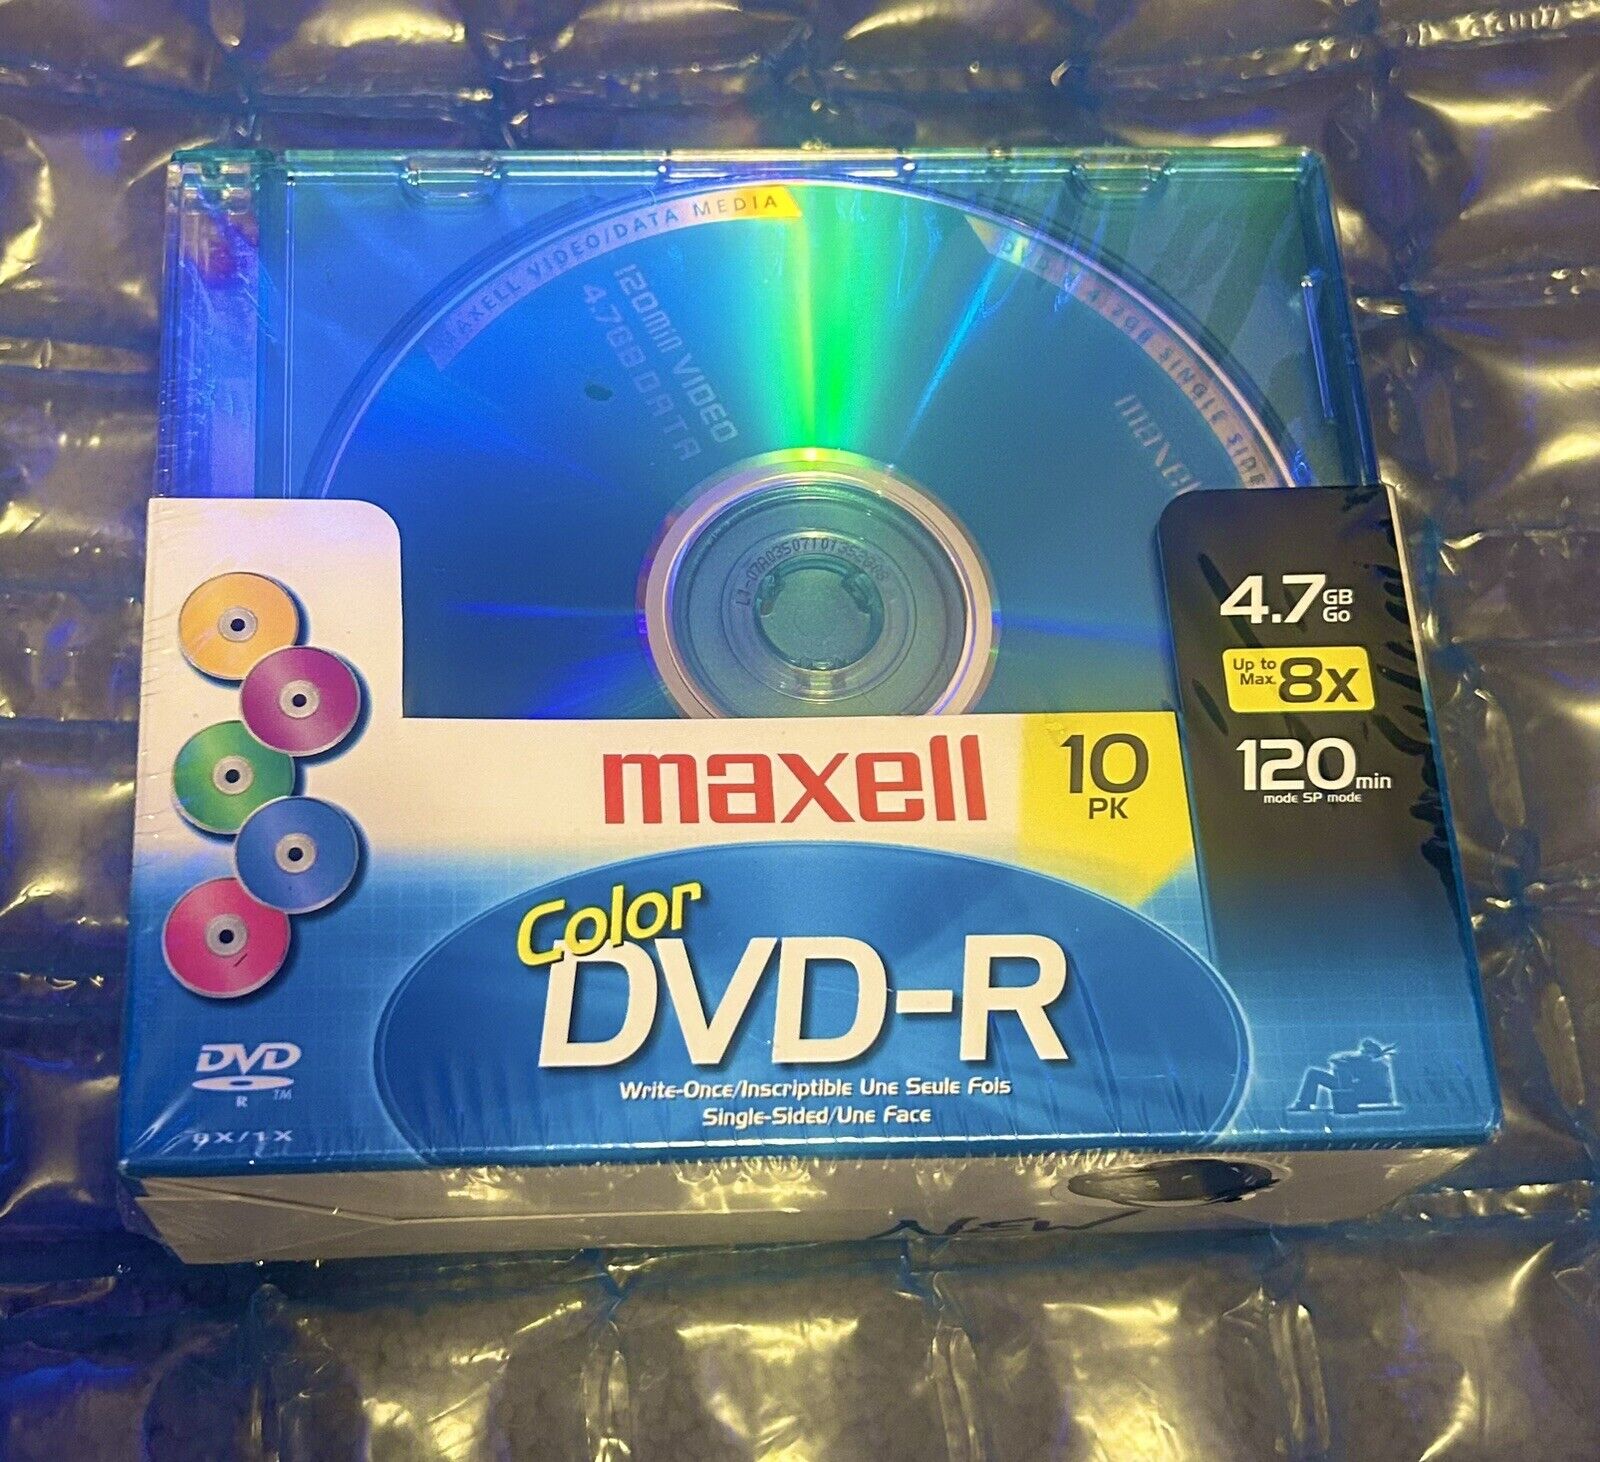 Maxell 10 Pack DVD-R 4.7GB 8x 120 Minutes, New, Sealed, Blank Media